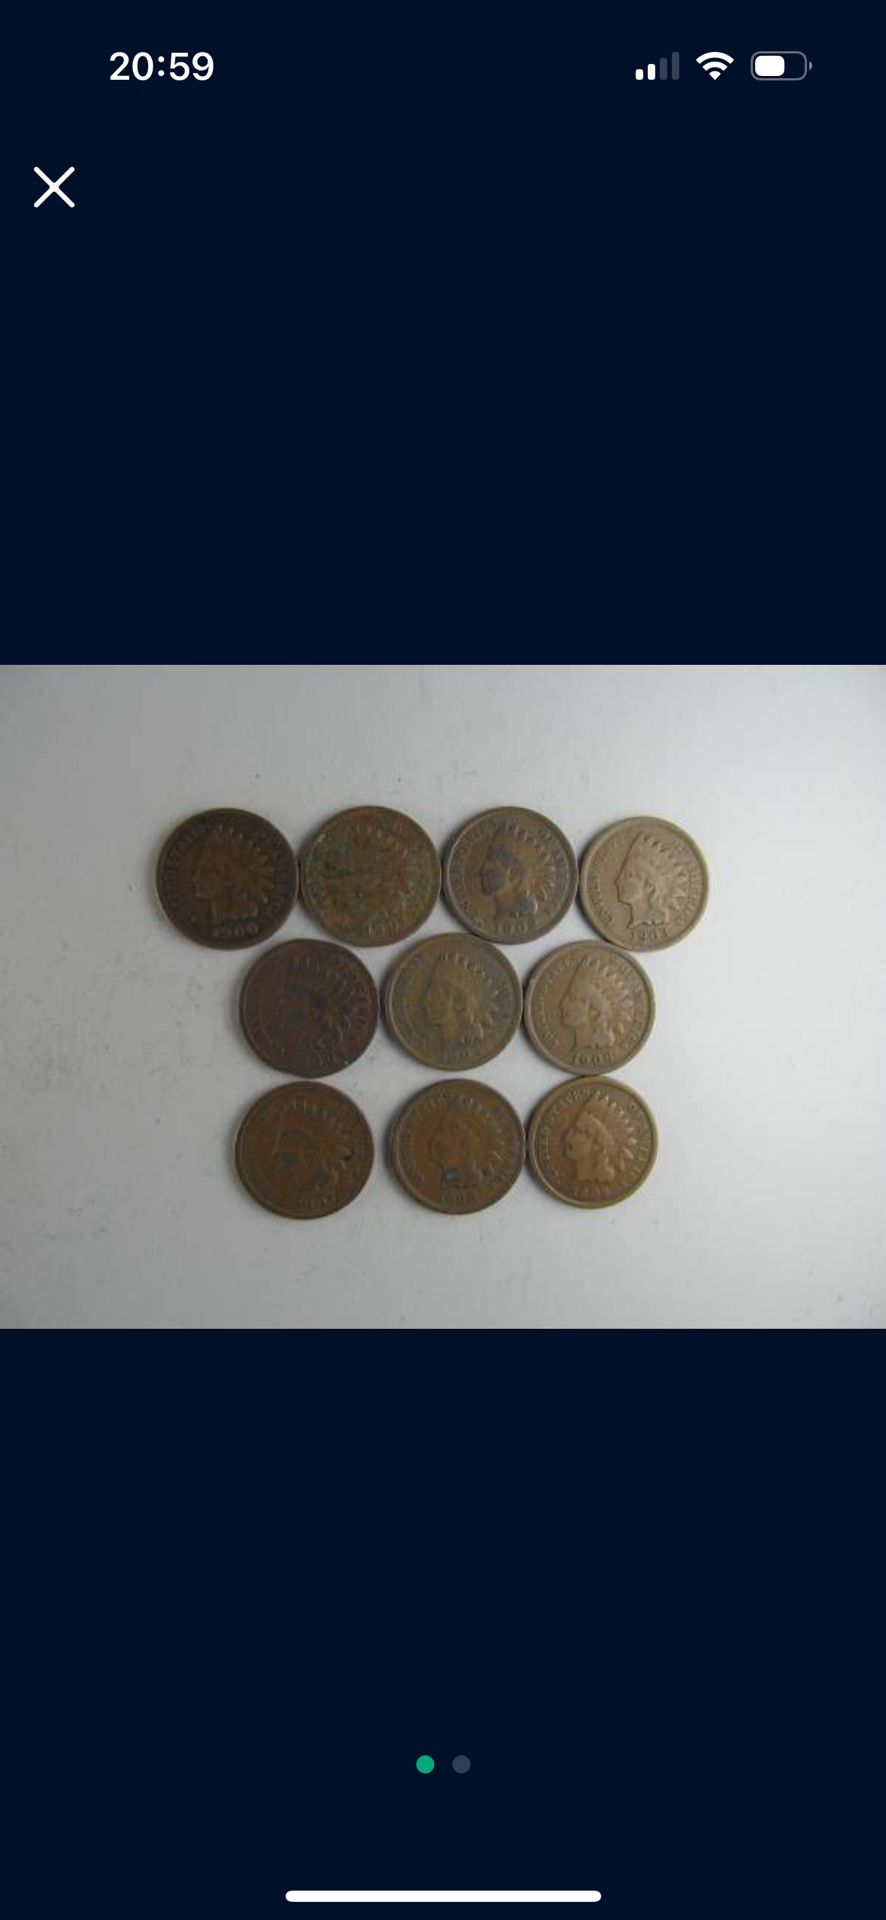 Set of 1900 to 1909 Indian Head Cents -- INCLUDES KEY DATE COIN!